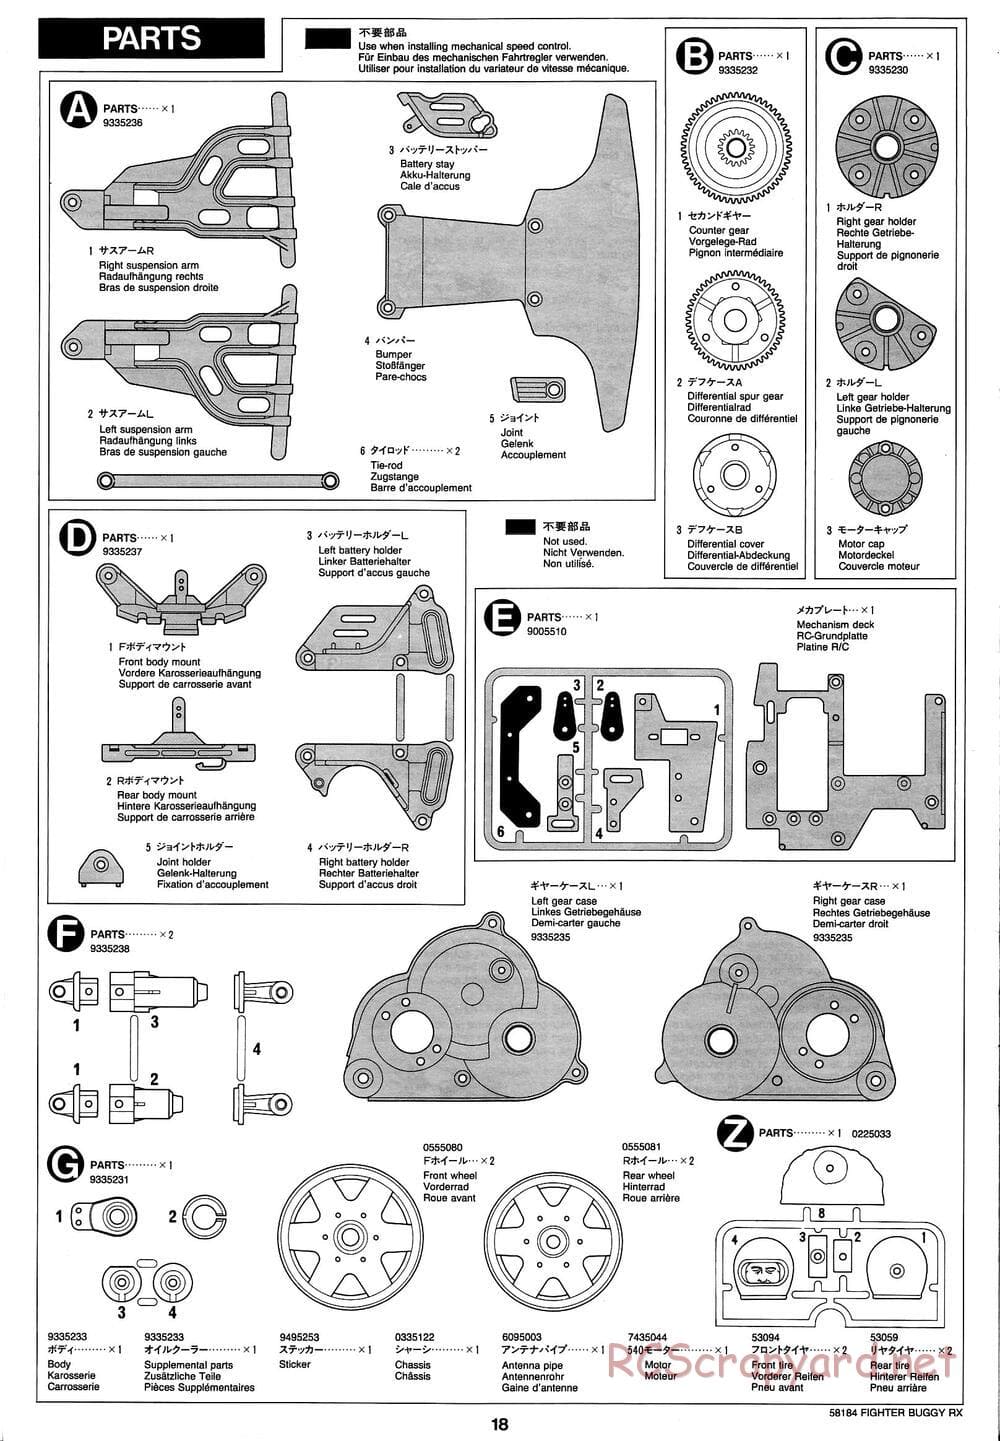 Tamiya - Fighter Buggy RX Chassis - Manual - Page 18